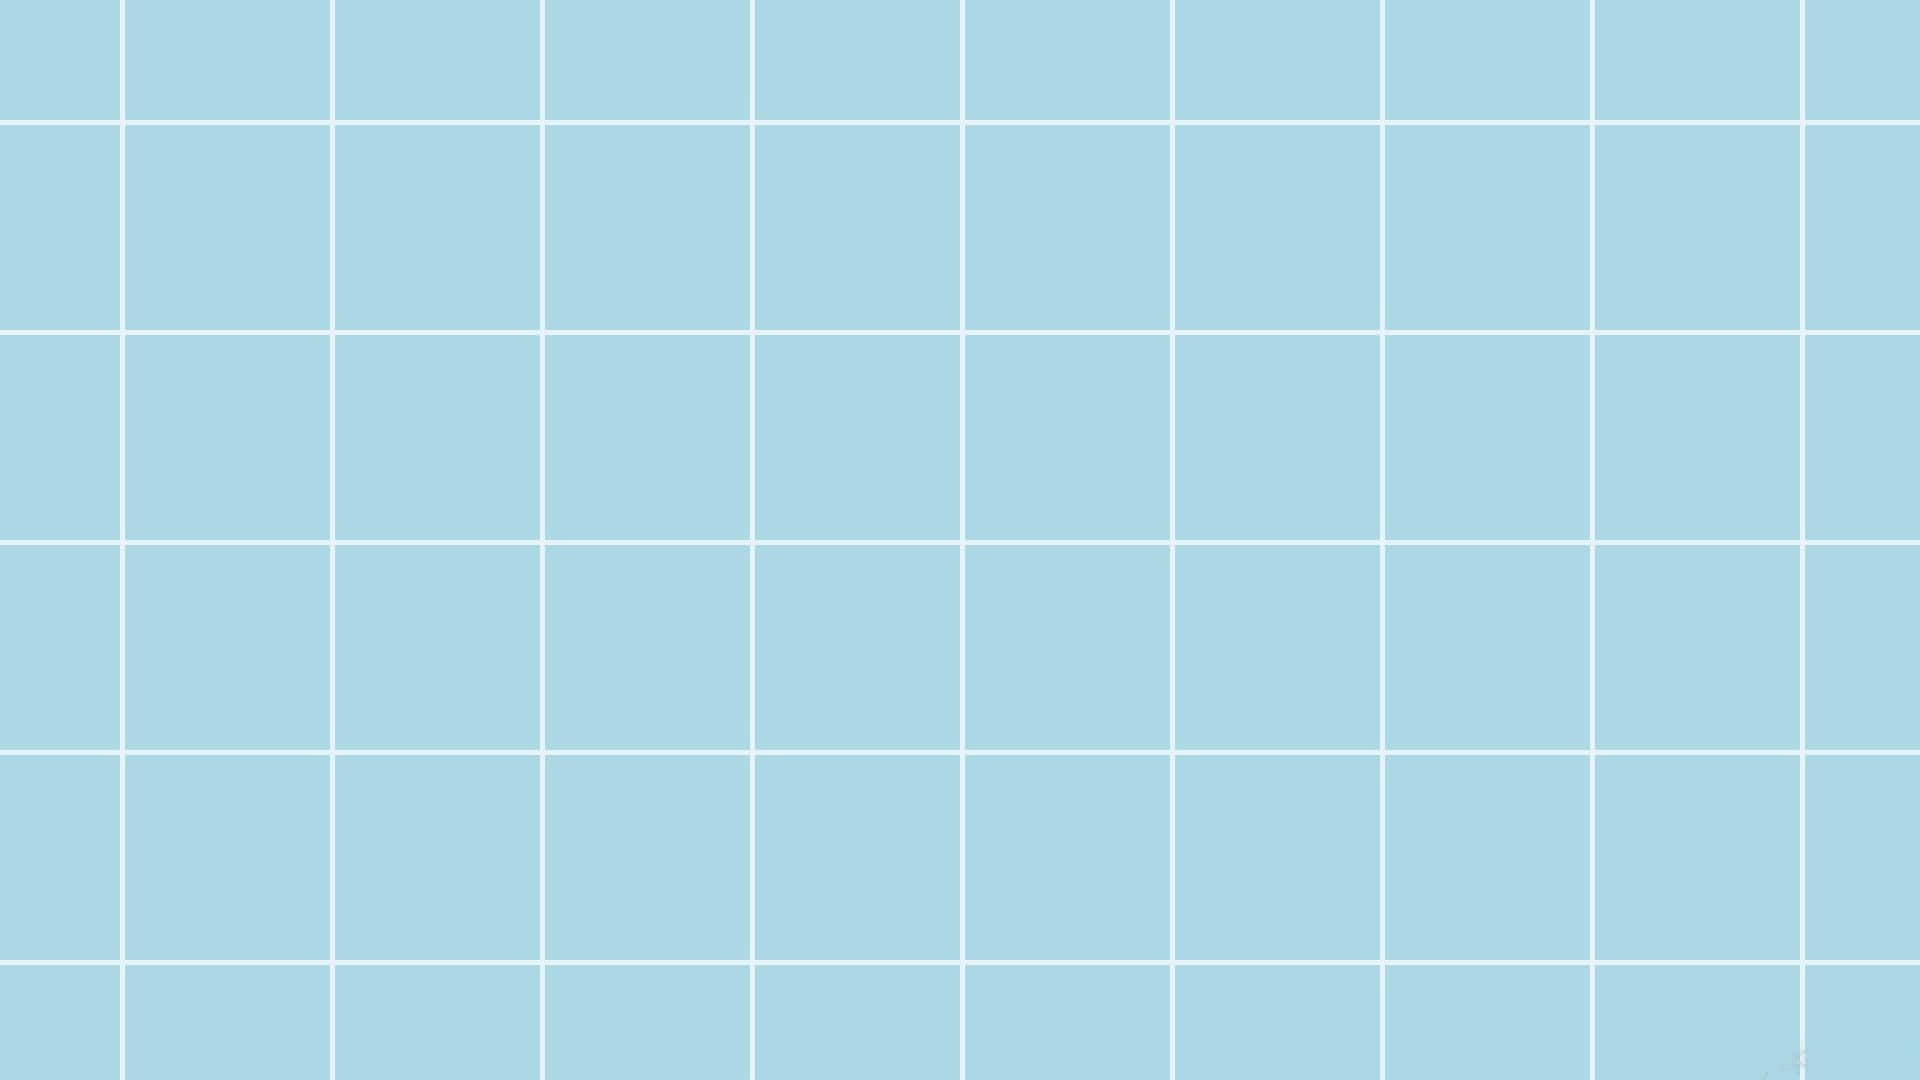 Make your desktop look beautiful with this dreamy pastel blue aesthetic Wallpaper